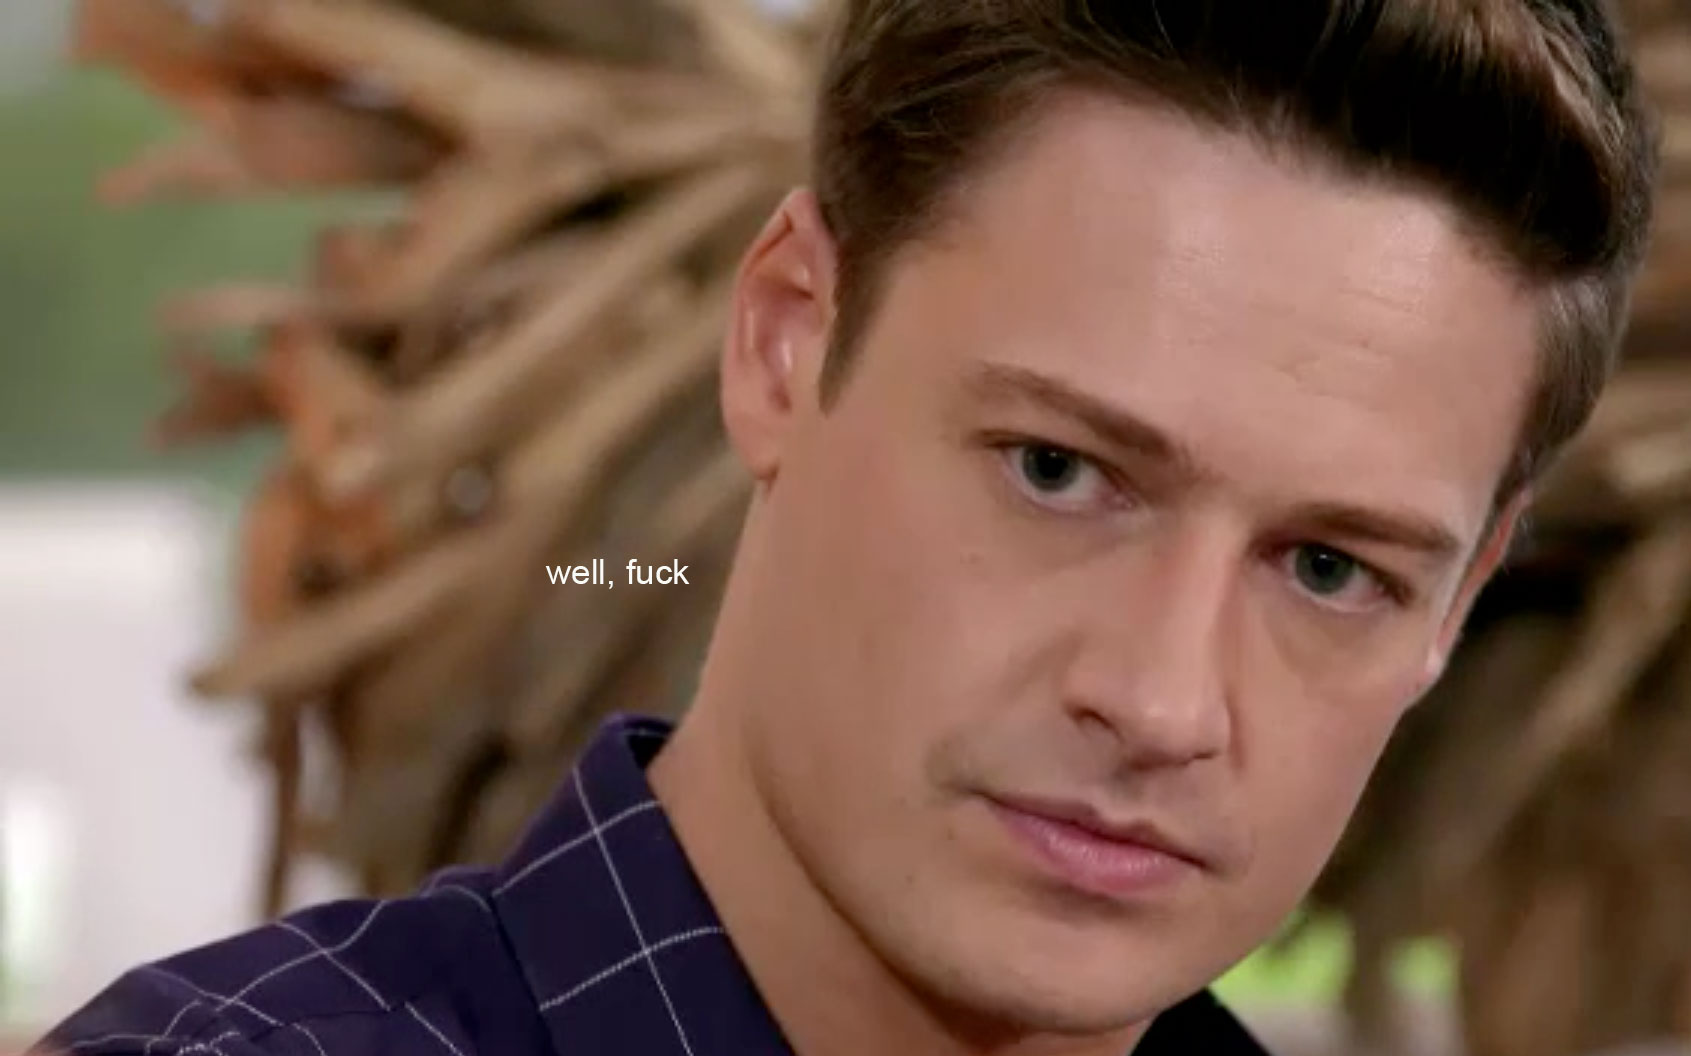 ‘BACHIE’ RECAP: “Smart Bachelor” Matt Somehow Manages To Get Dumped Twice In One Episode